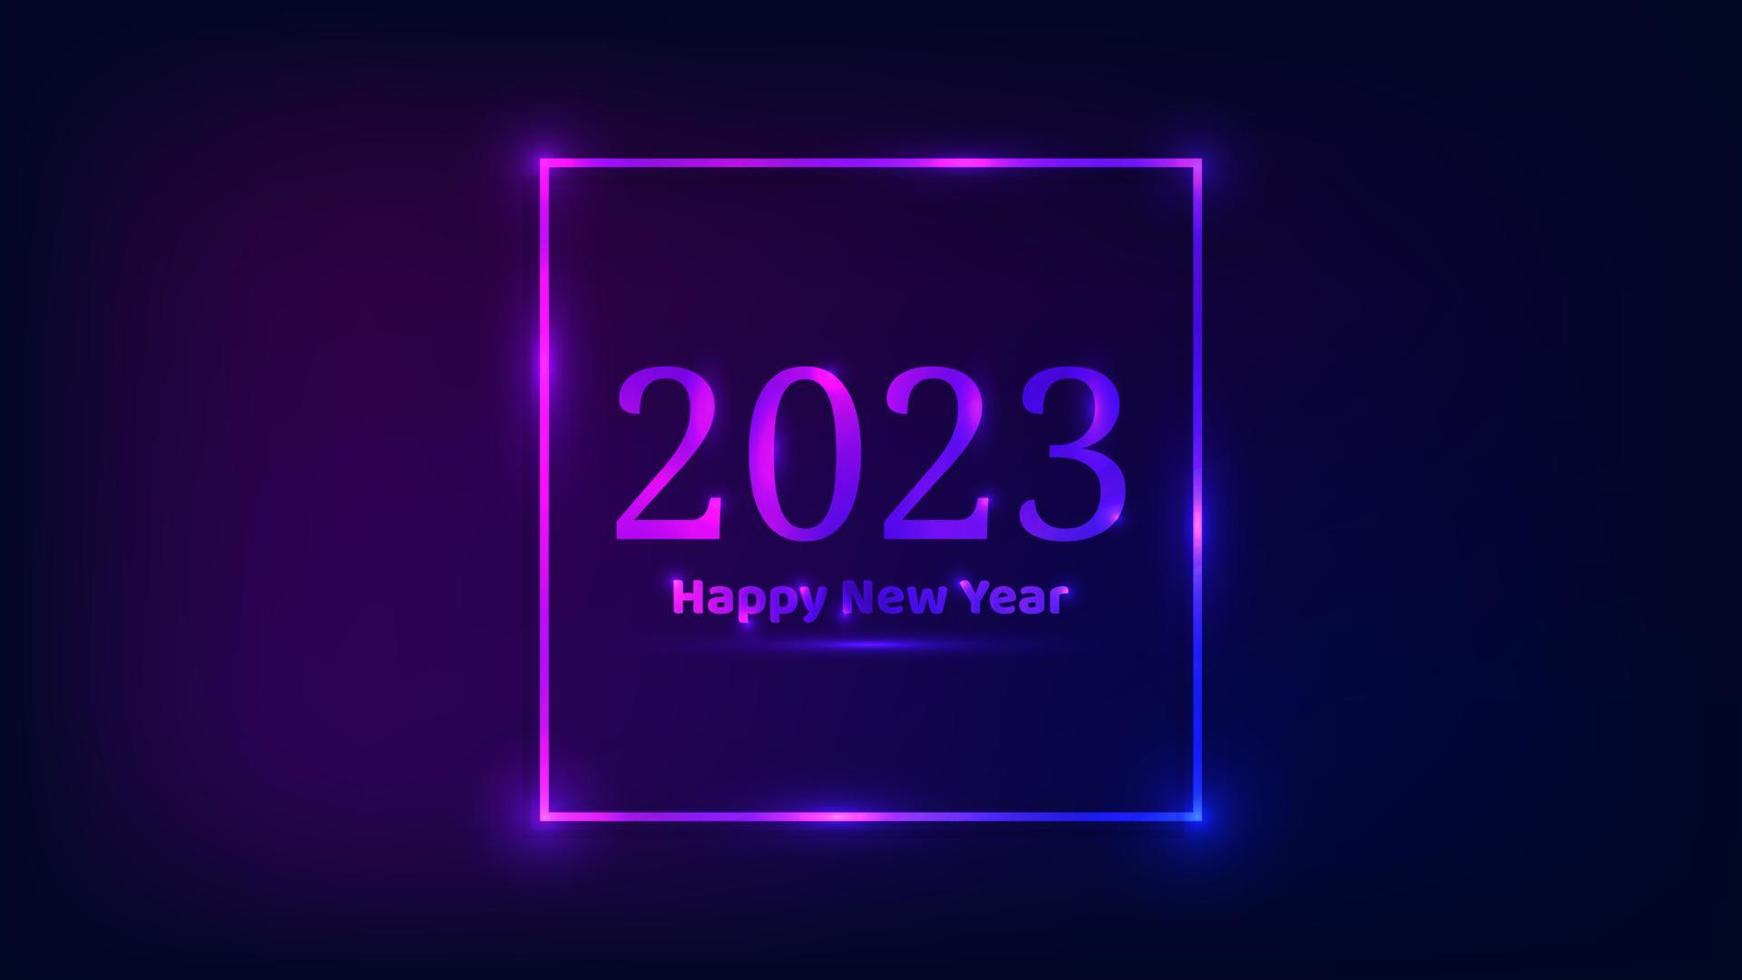 2023 Happy New Year neon background. Neon square frame with shining effects for Christmas holiday greeting card, flyers or posters. Vector illustration